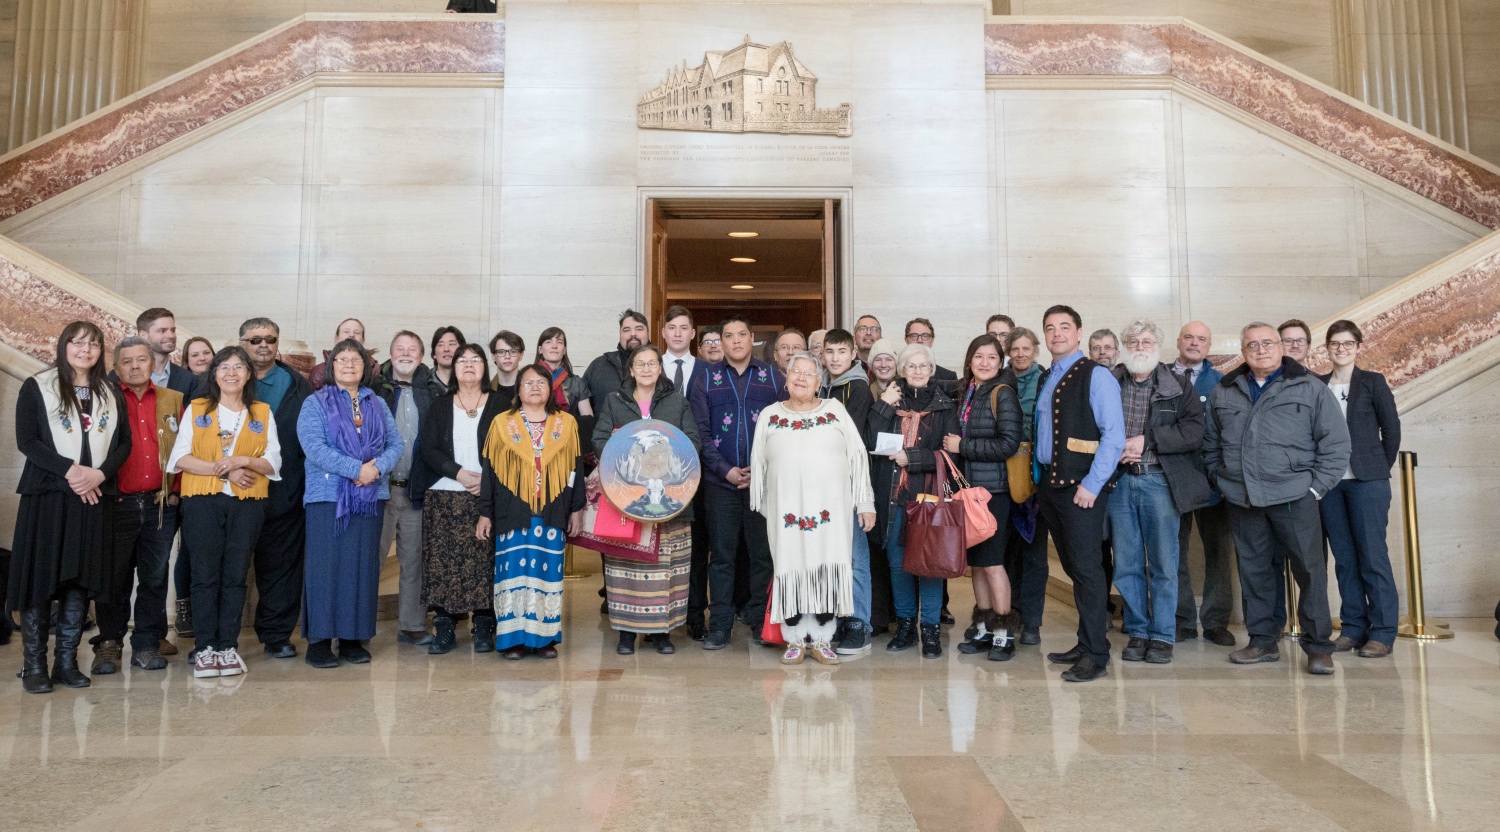 Peel Watershed delegation at the Grand Entrance Hall of the Supreme Court of Canada for the hearing on the Peel Watershed legal case. Photo by Justin van Leeuwen